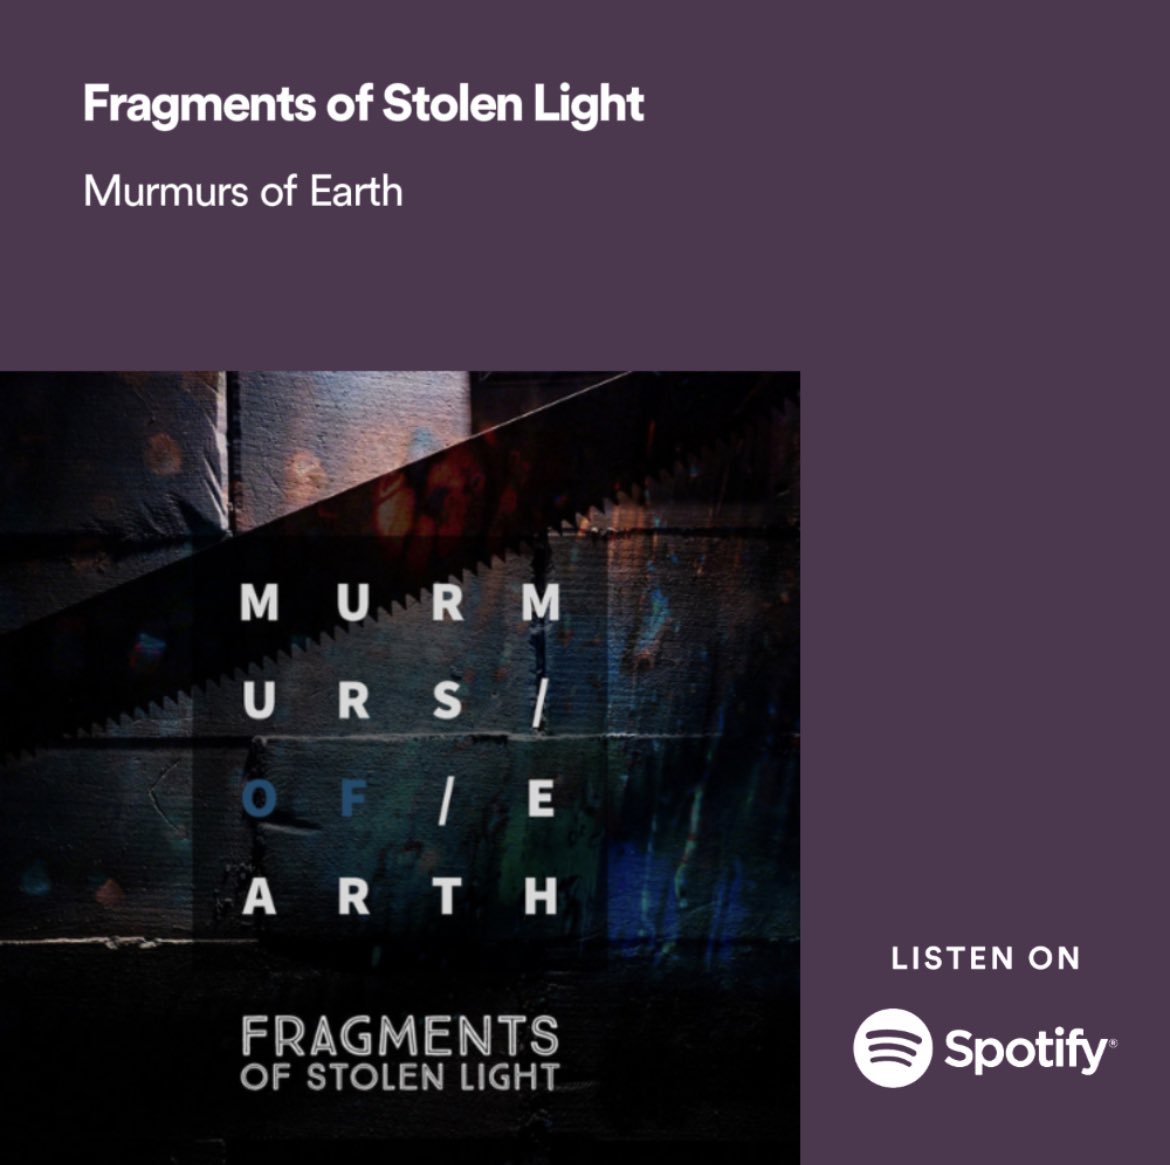 New music from Murmurs of Earth coming soon but in the meantime don’t forget our last album, Fragments of Stolen Light, is still available to stream: open.spotify.com/album/33VcwV2t…